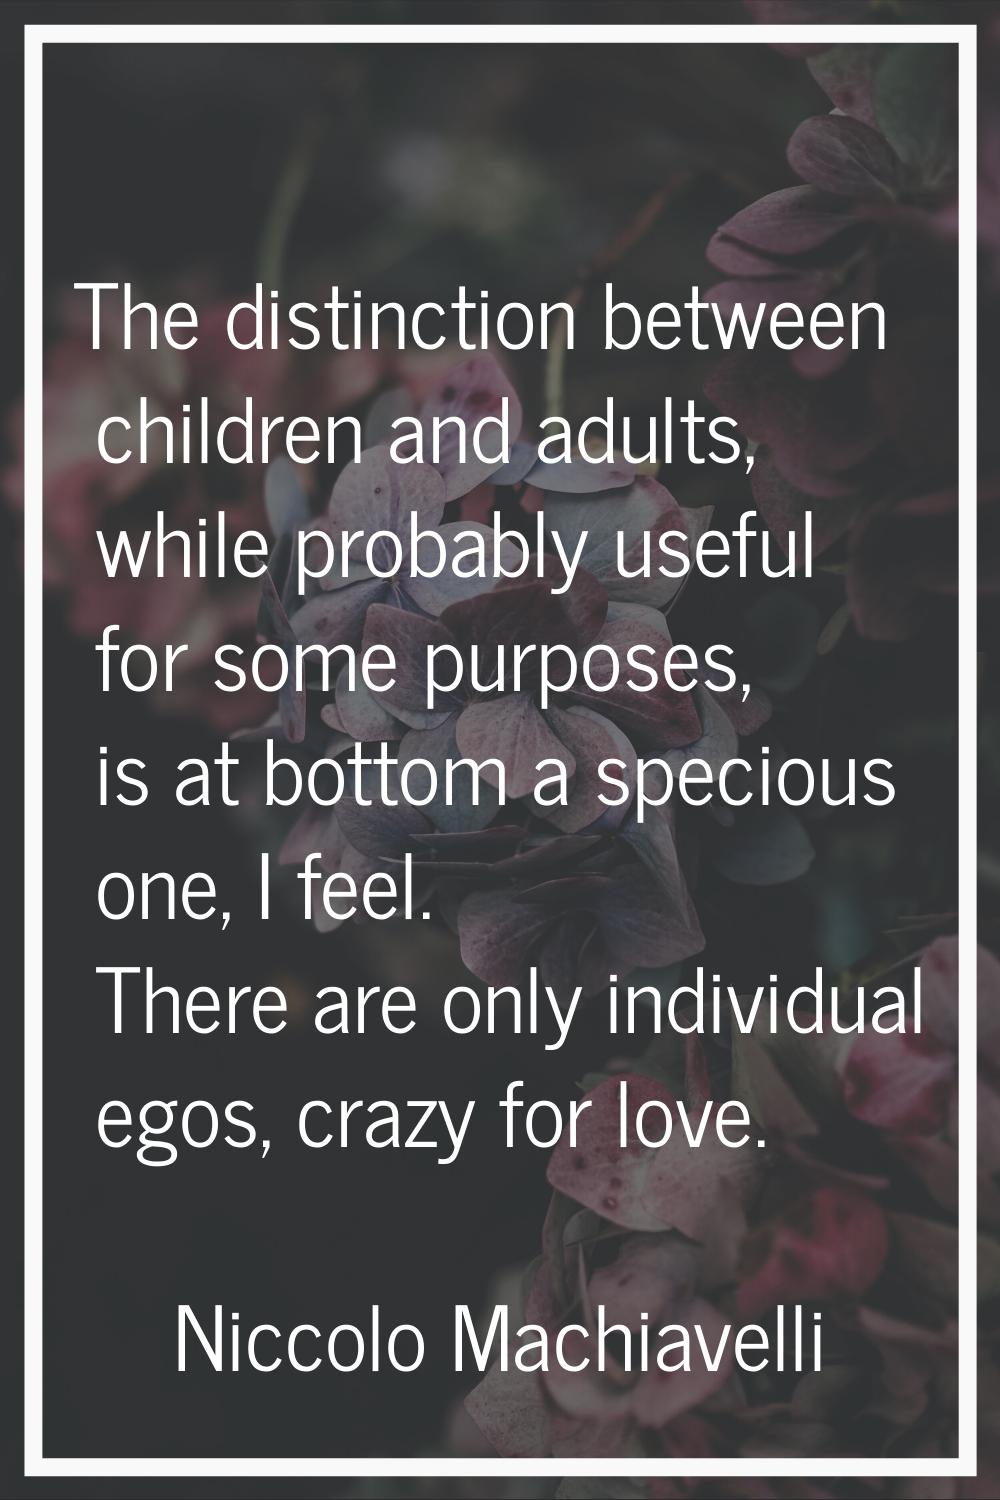 The distinction between children and adults, while probably useful for some purposes, is at bottom 